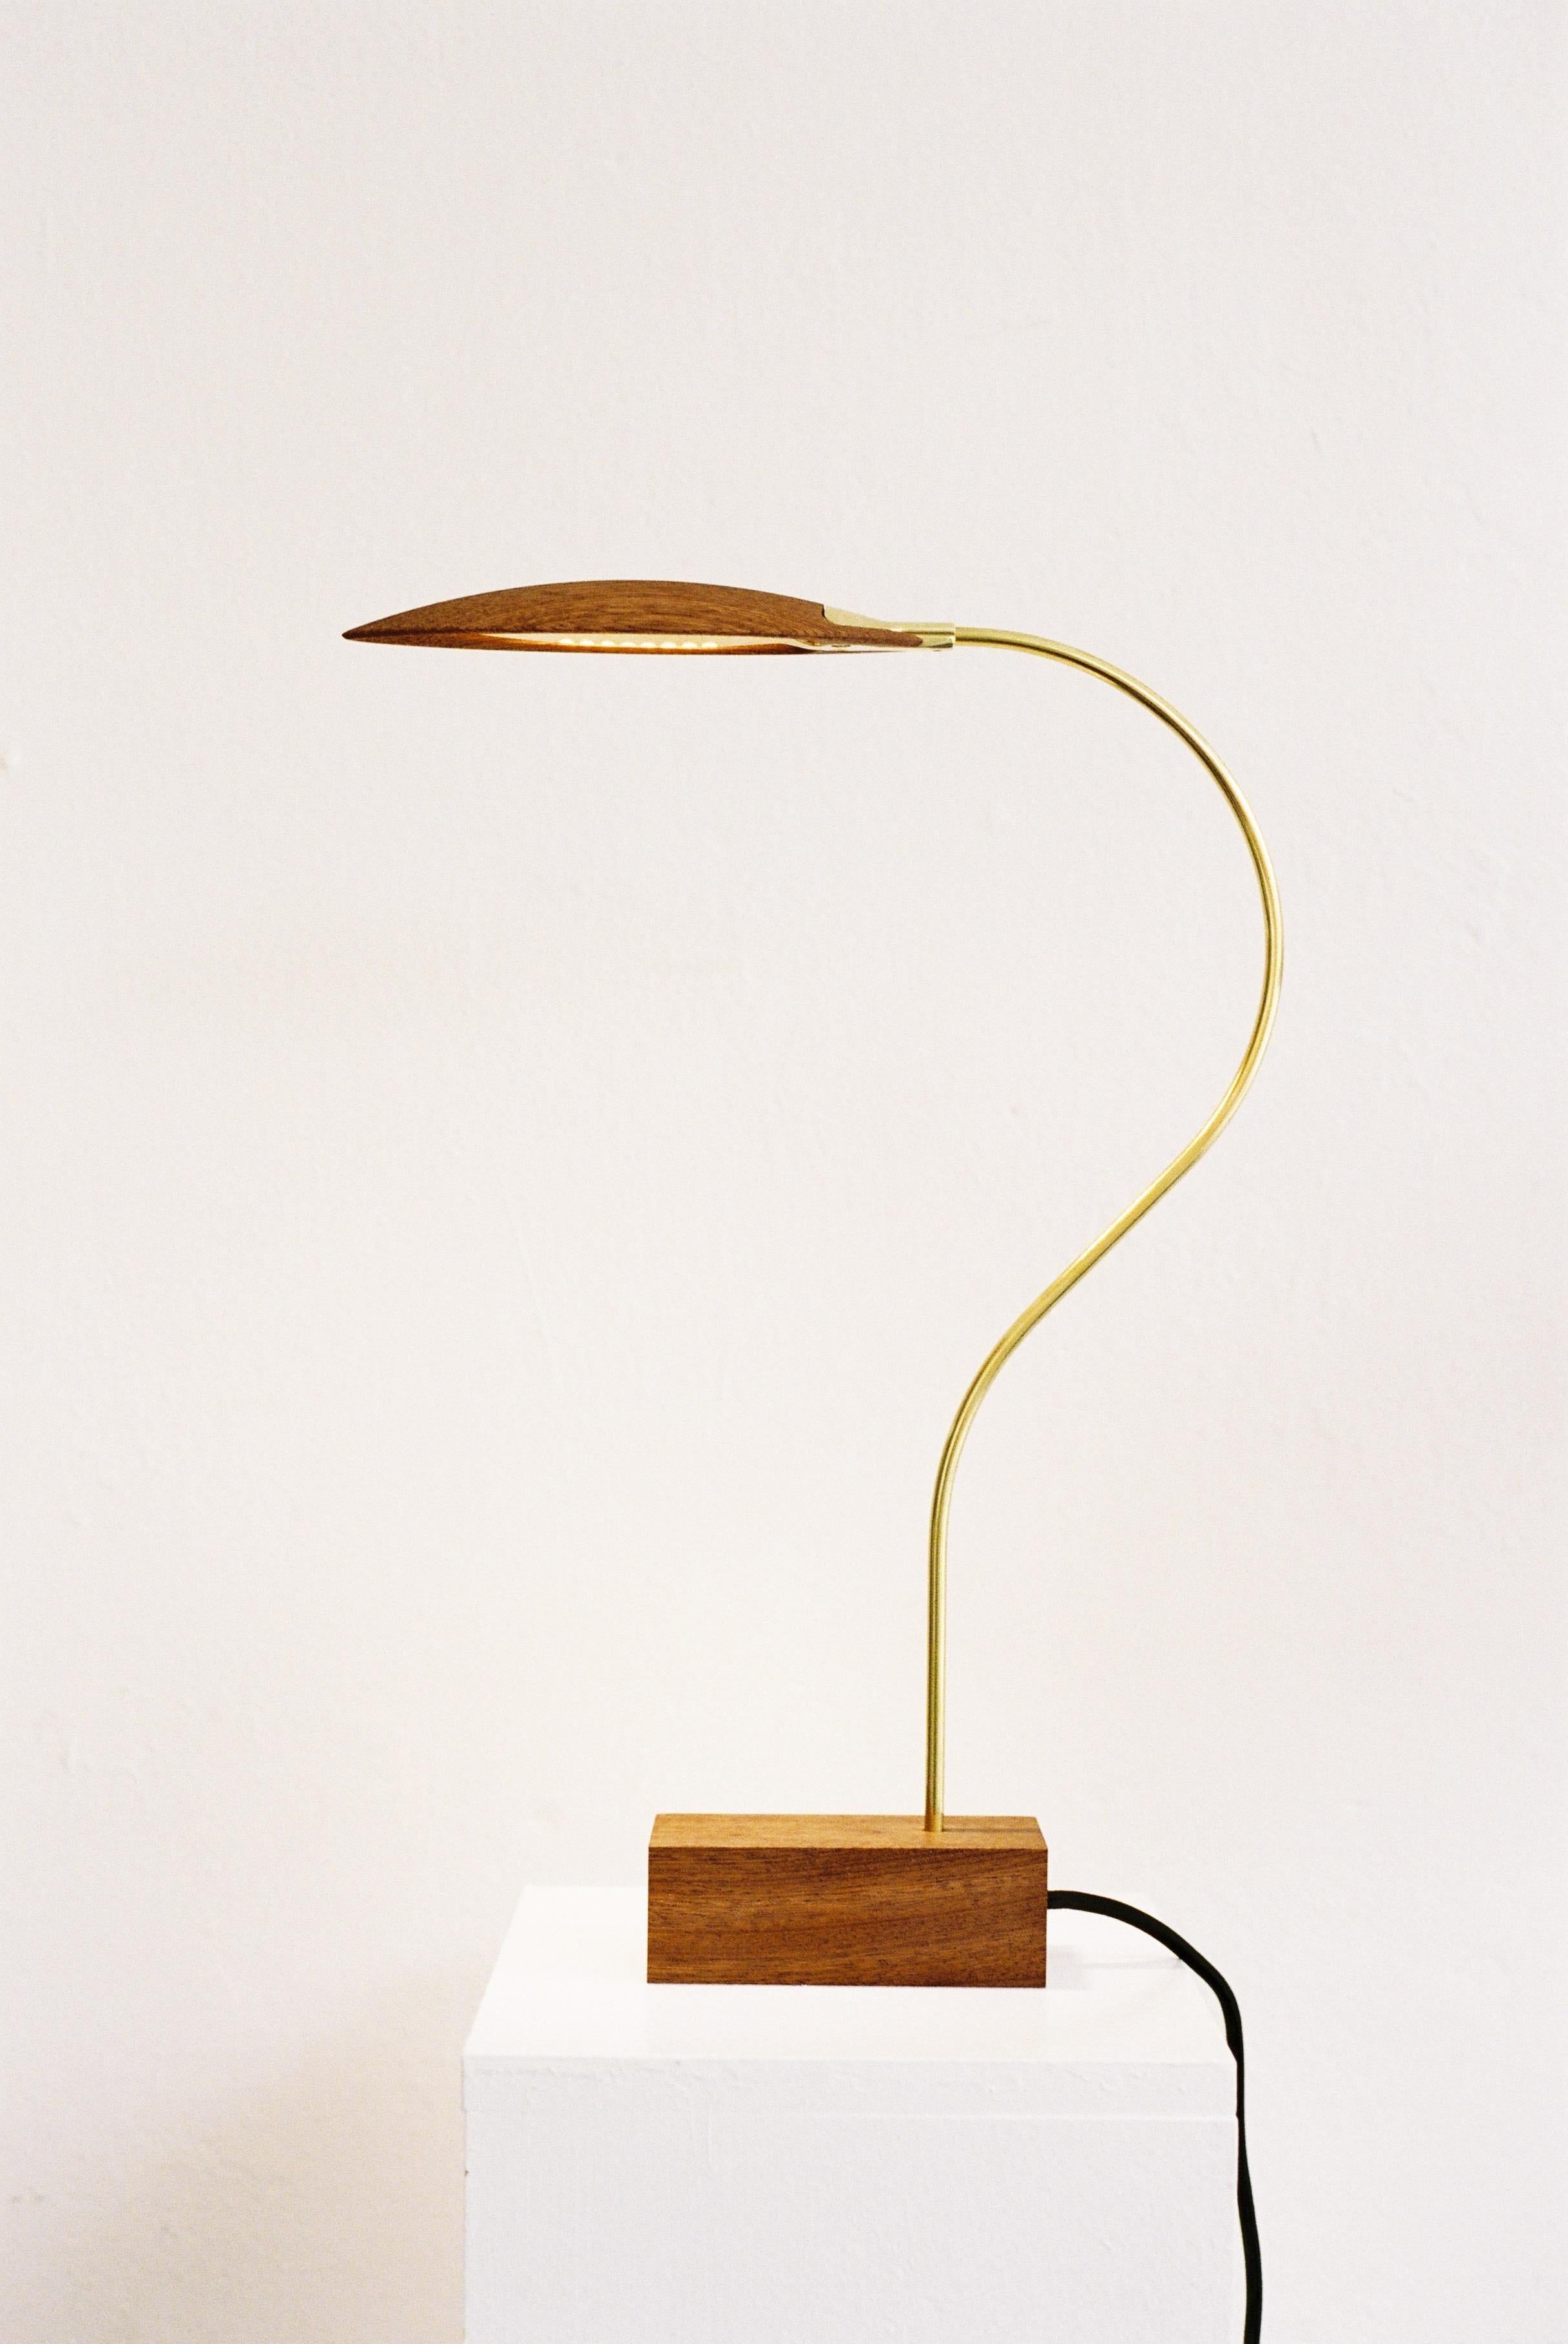 No. 2 table lamp by Mernoe
Dimensions: D30 x W 5,5 x H 45cm
Materials: Wood, Metal.
Wood options: Sipo Maghoni, smoked oak, ash, walnut.
Metal options: Polished brass, glasblown brass, chrome.

NO. 2 is the second design of Morten Mernøe. A